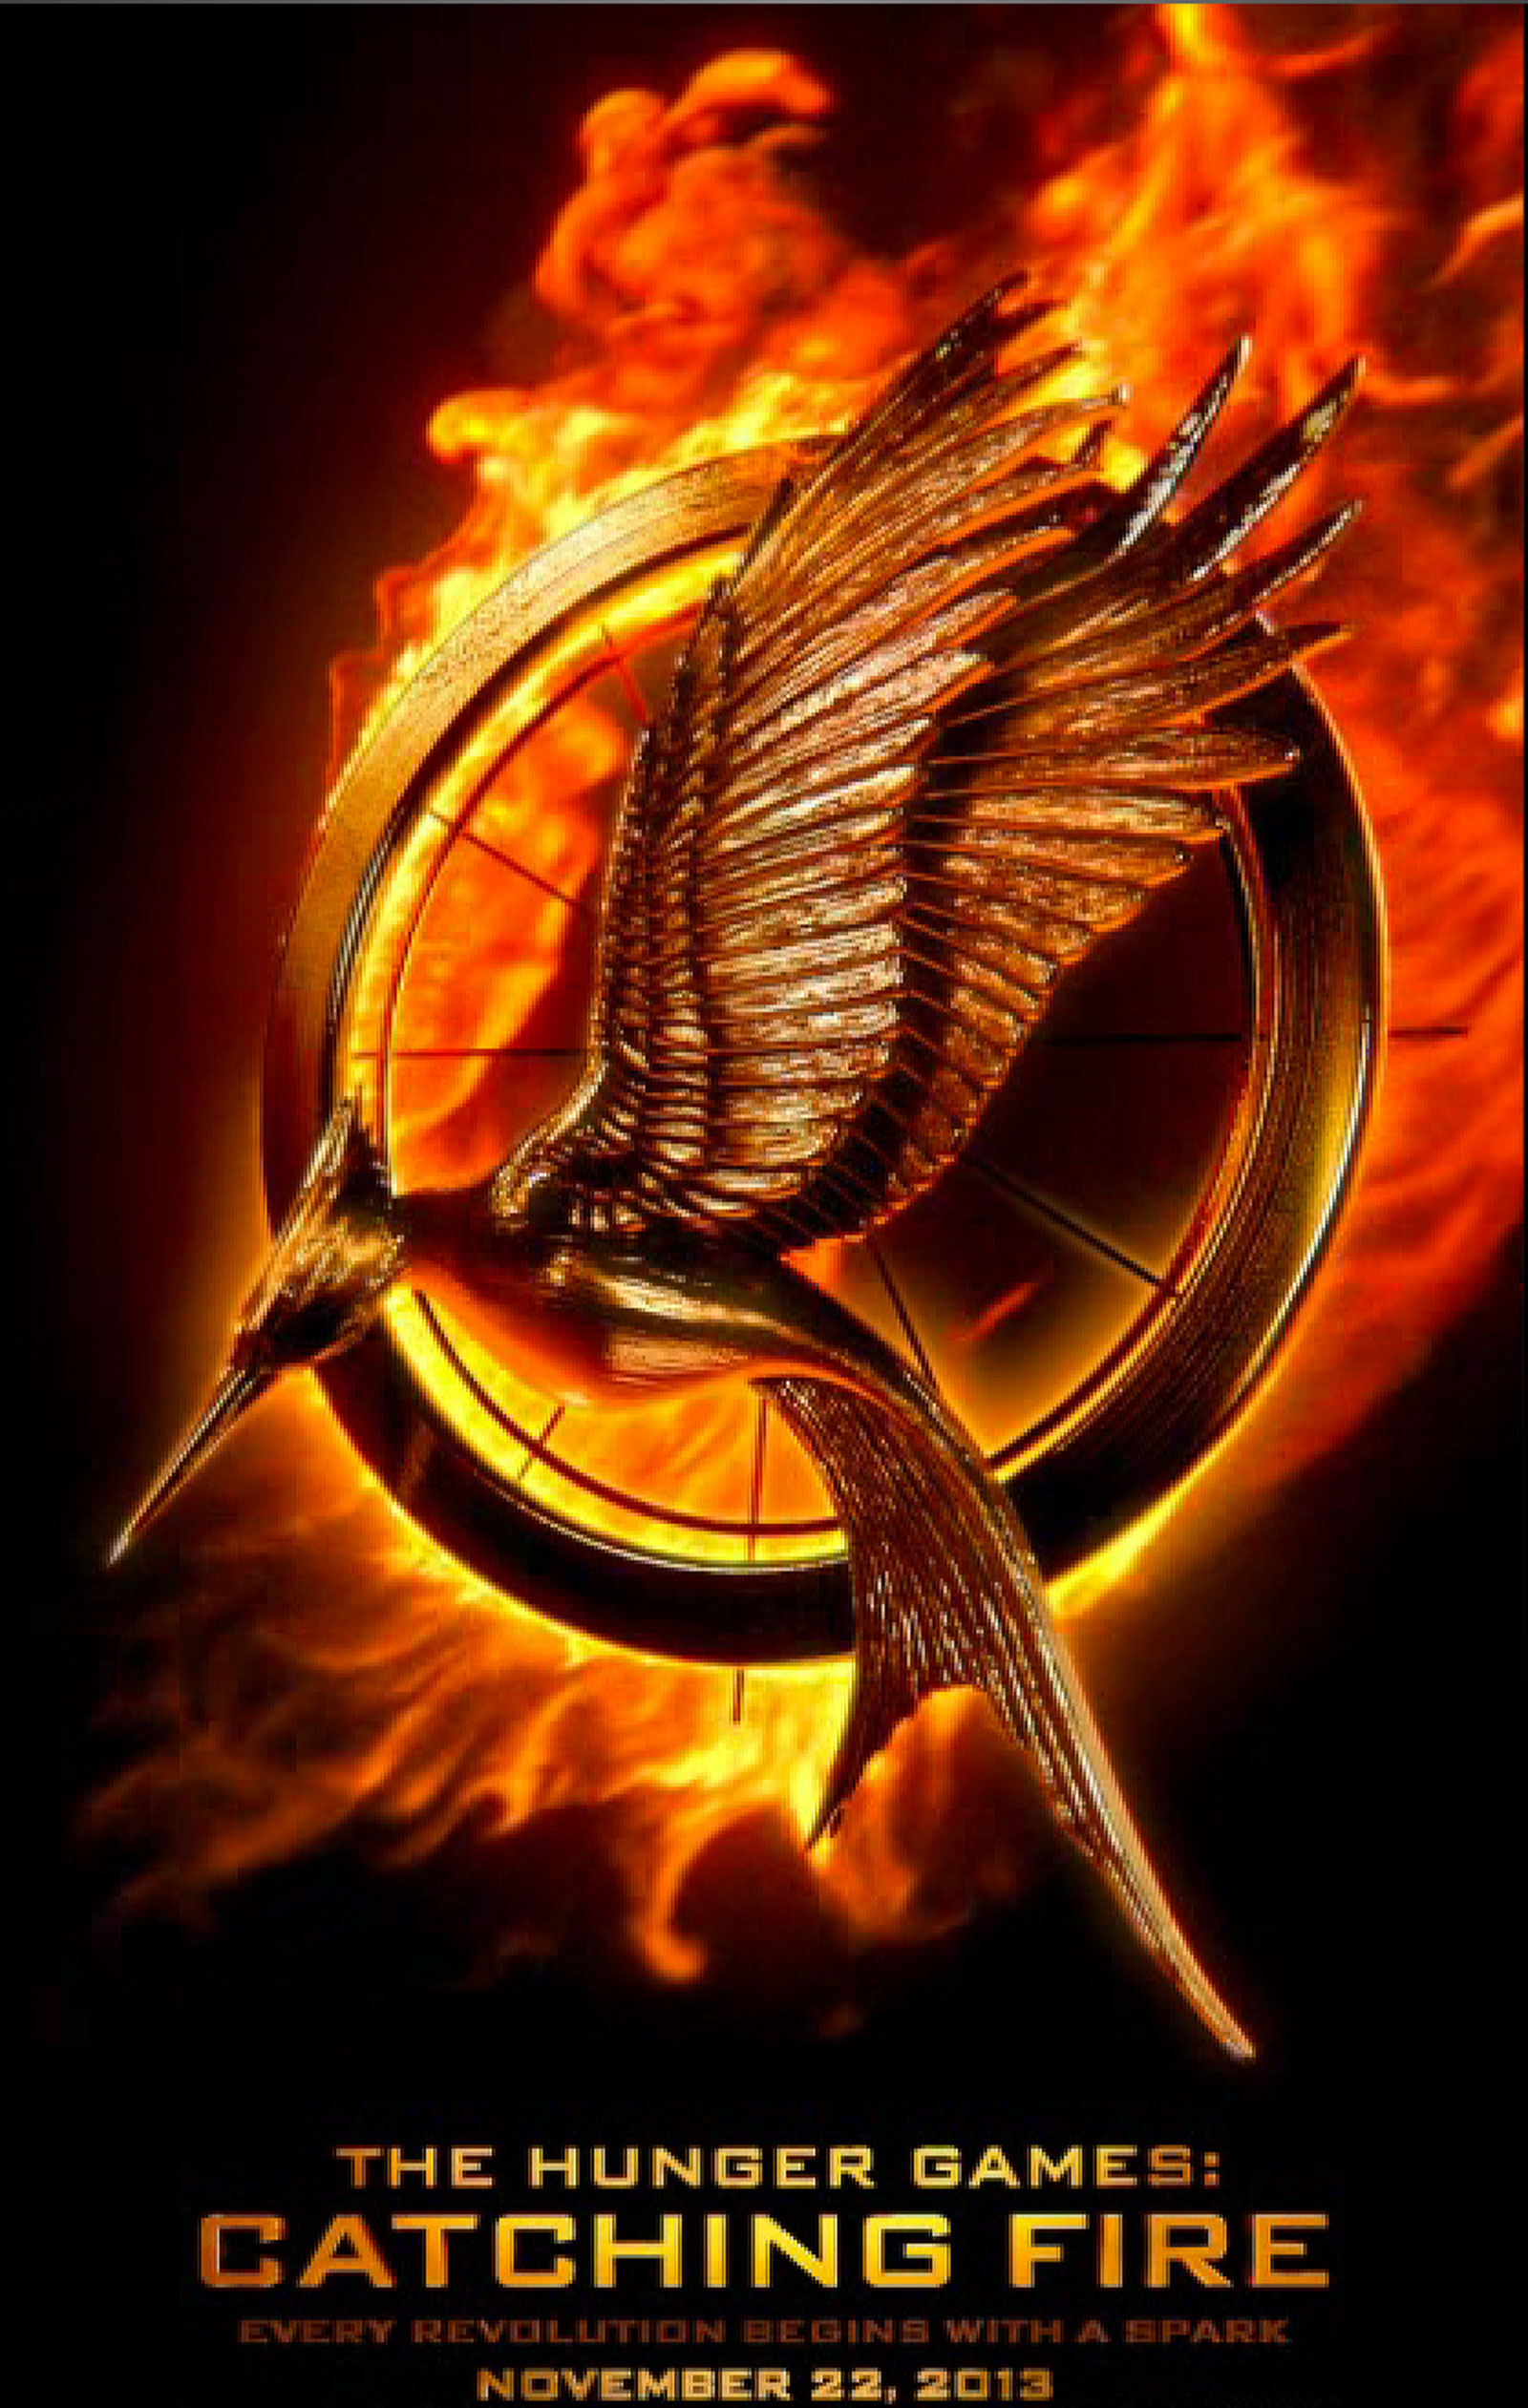 download the new version for ios The Hunger Games: Catching Fire